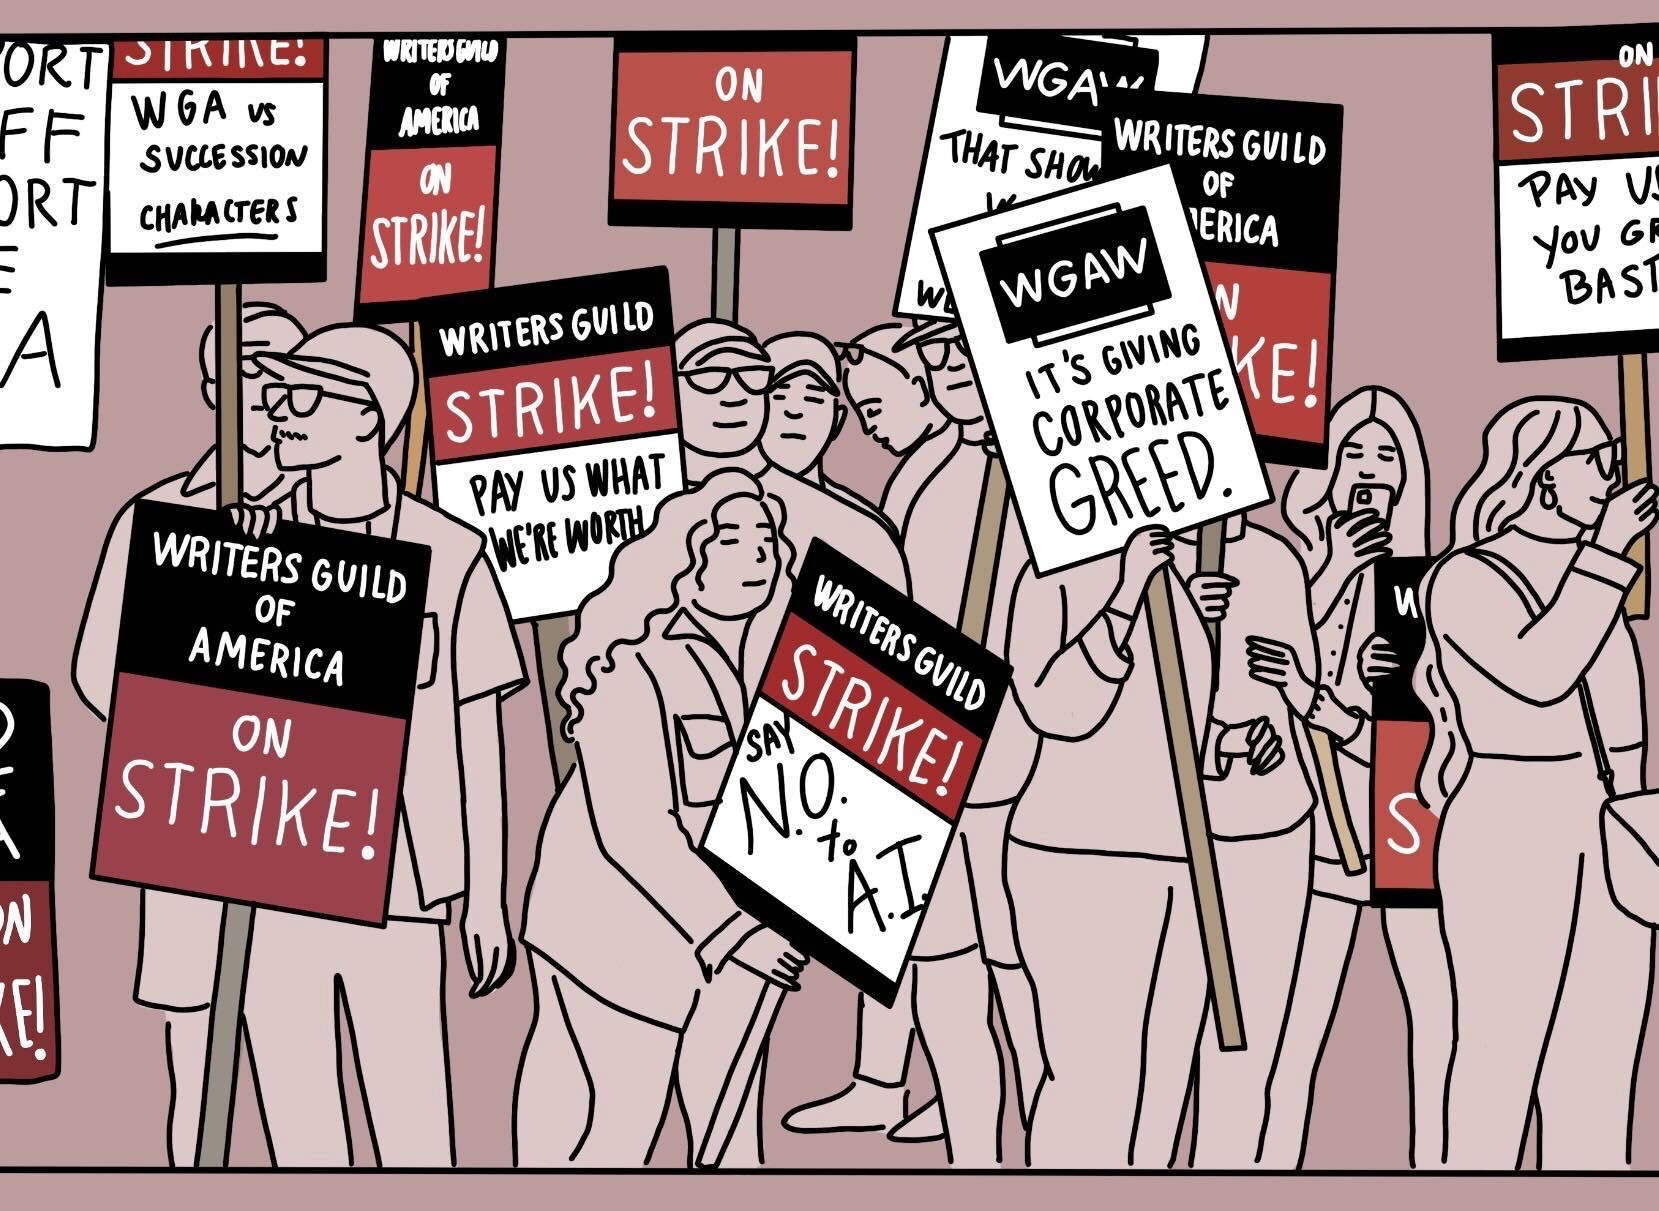 Raising their red, white, and black signs, WGA strikers gather in protest. The union has been on strike since July, advocating for better pay and improved regulations on AI.